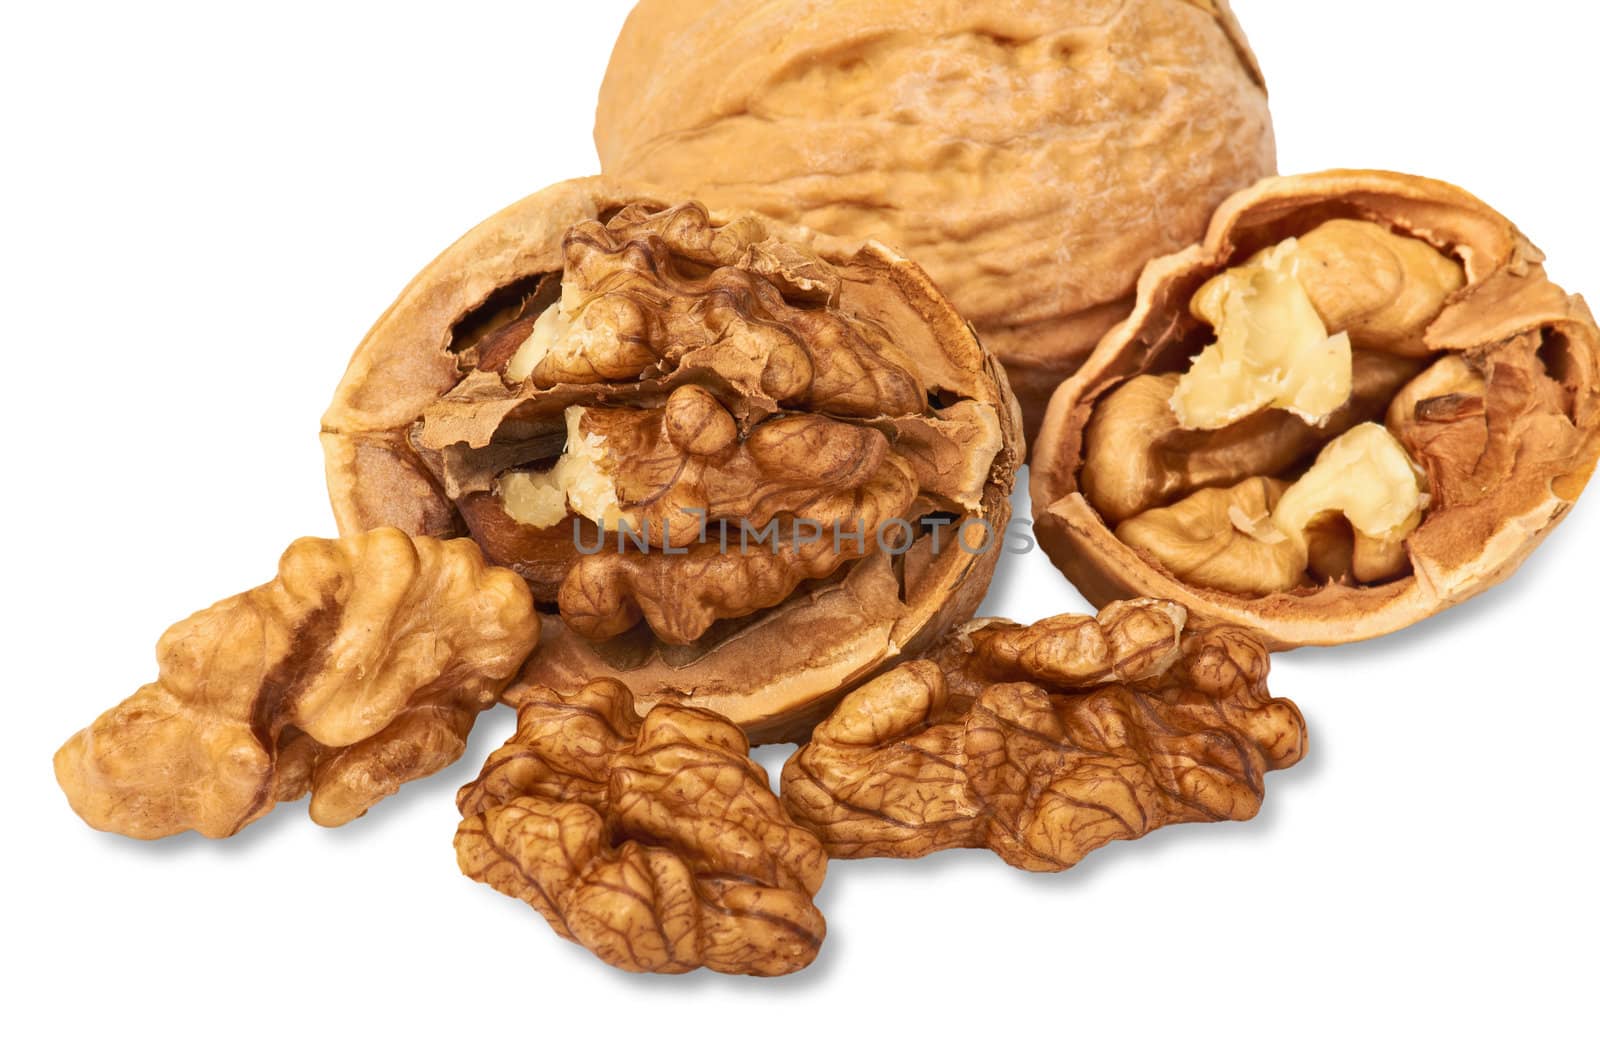 Group of walnuts isolated on white background with light shadow.